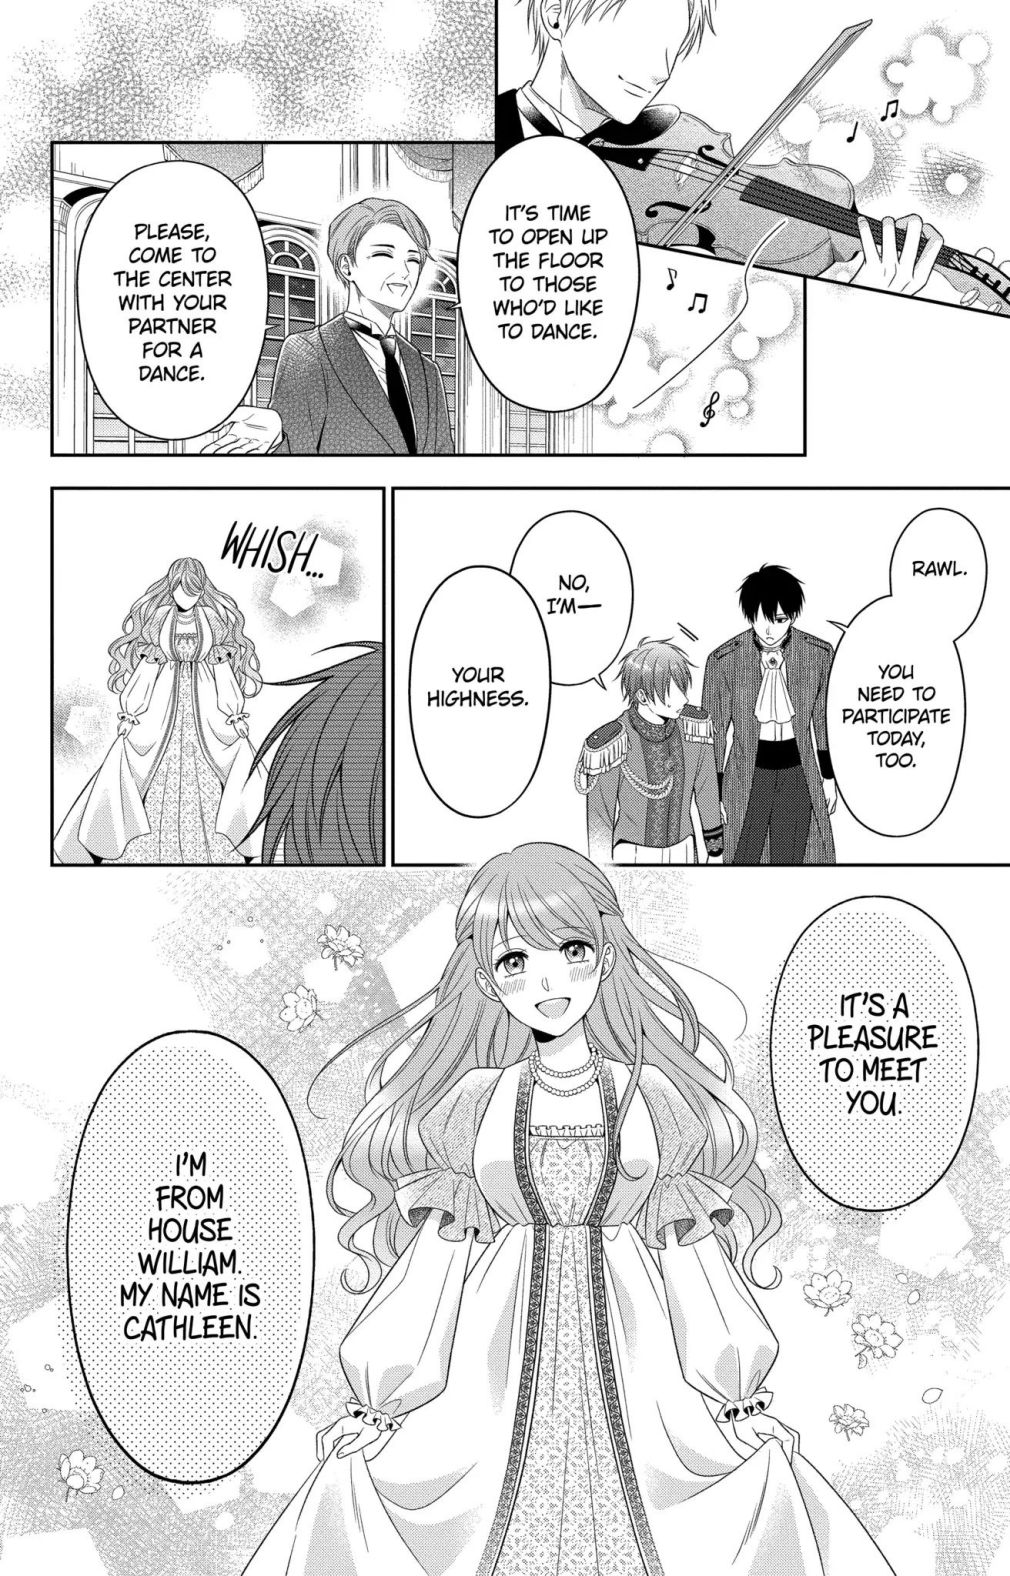 Disguised As A Butler The Former Princess Evades The Prince’S Love! - Page 2